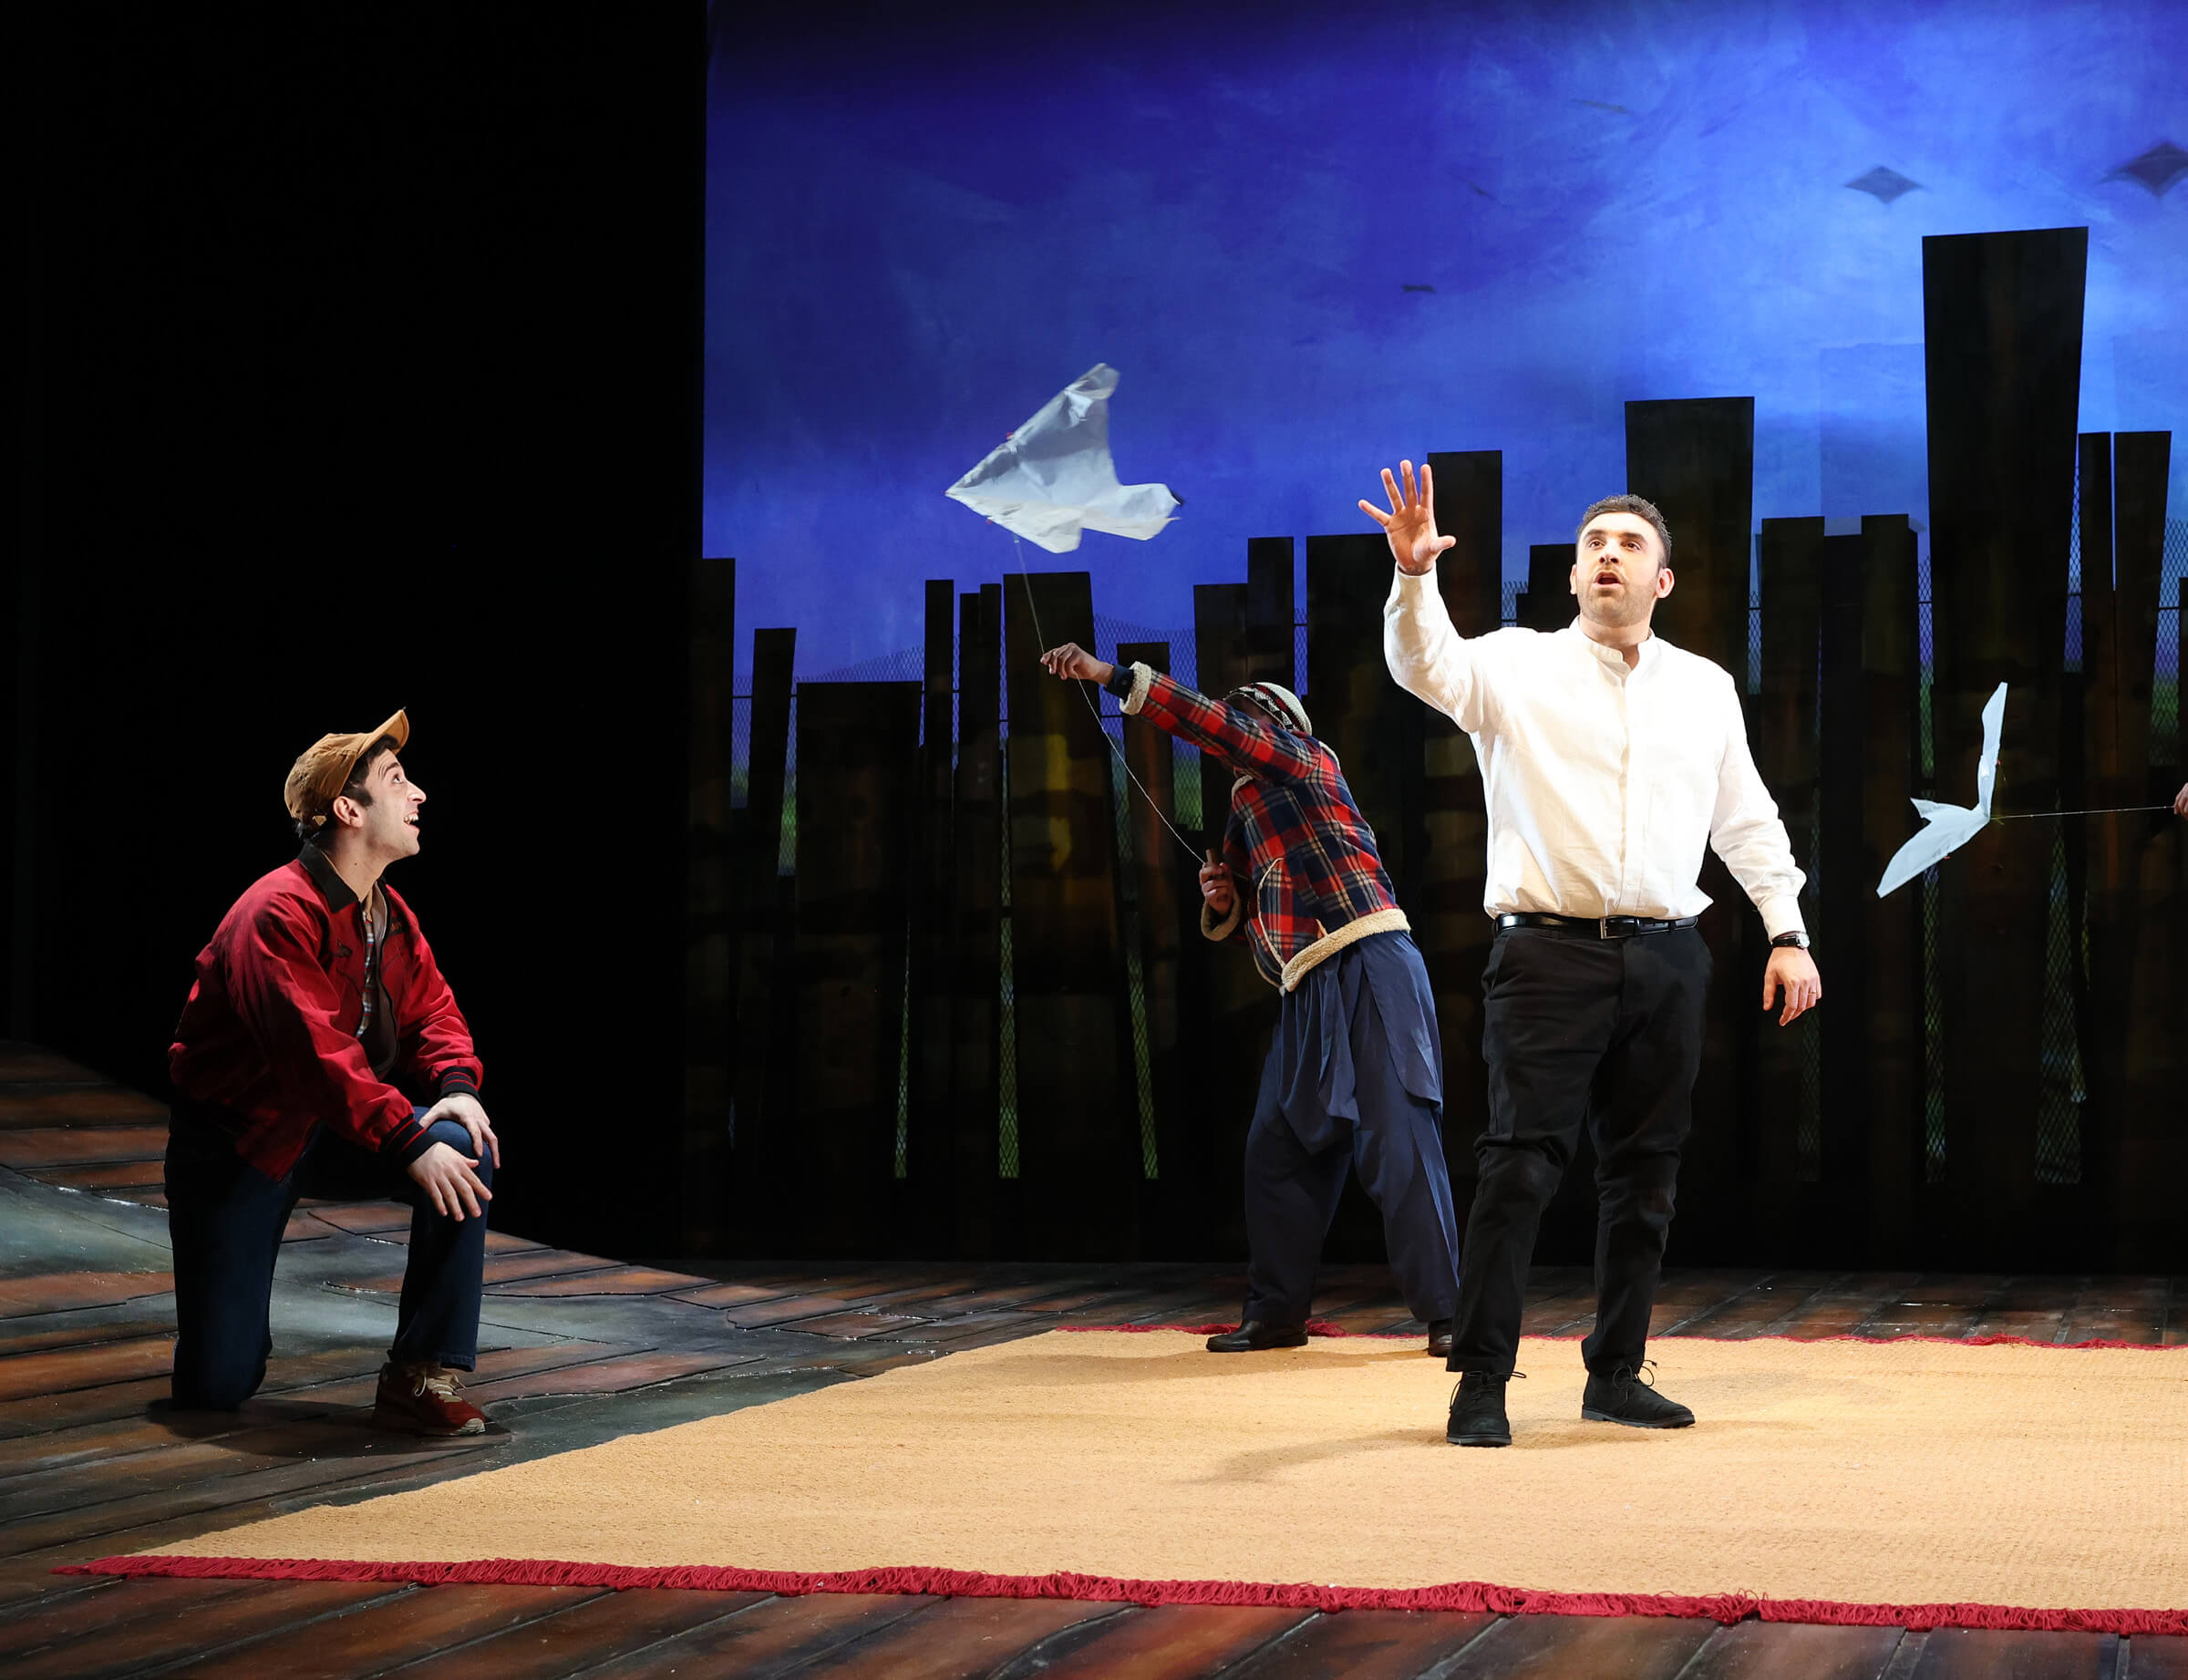 Three cast members from the Kite runner on stage at Malvern Theatres with kites